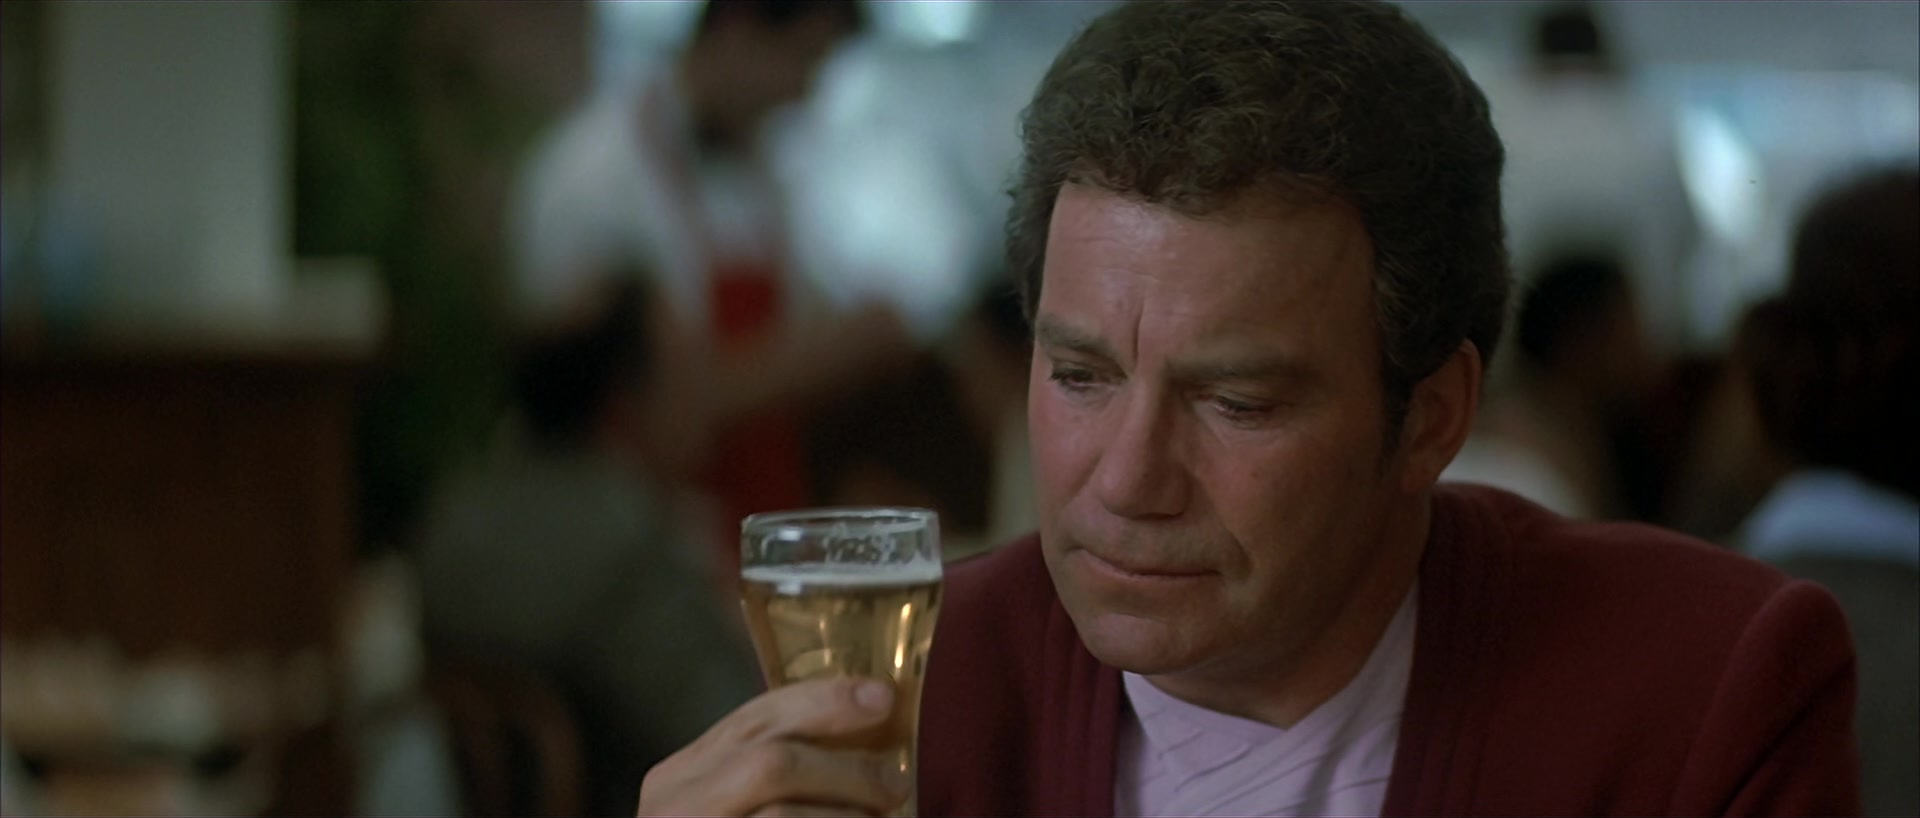 Captain Kirk (William Shatner) finds himself taken aback by the taste of 20th century beer in Star Trek IV: The Voyage Home (1986), Paramount Pictures via Blu-ray